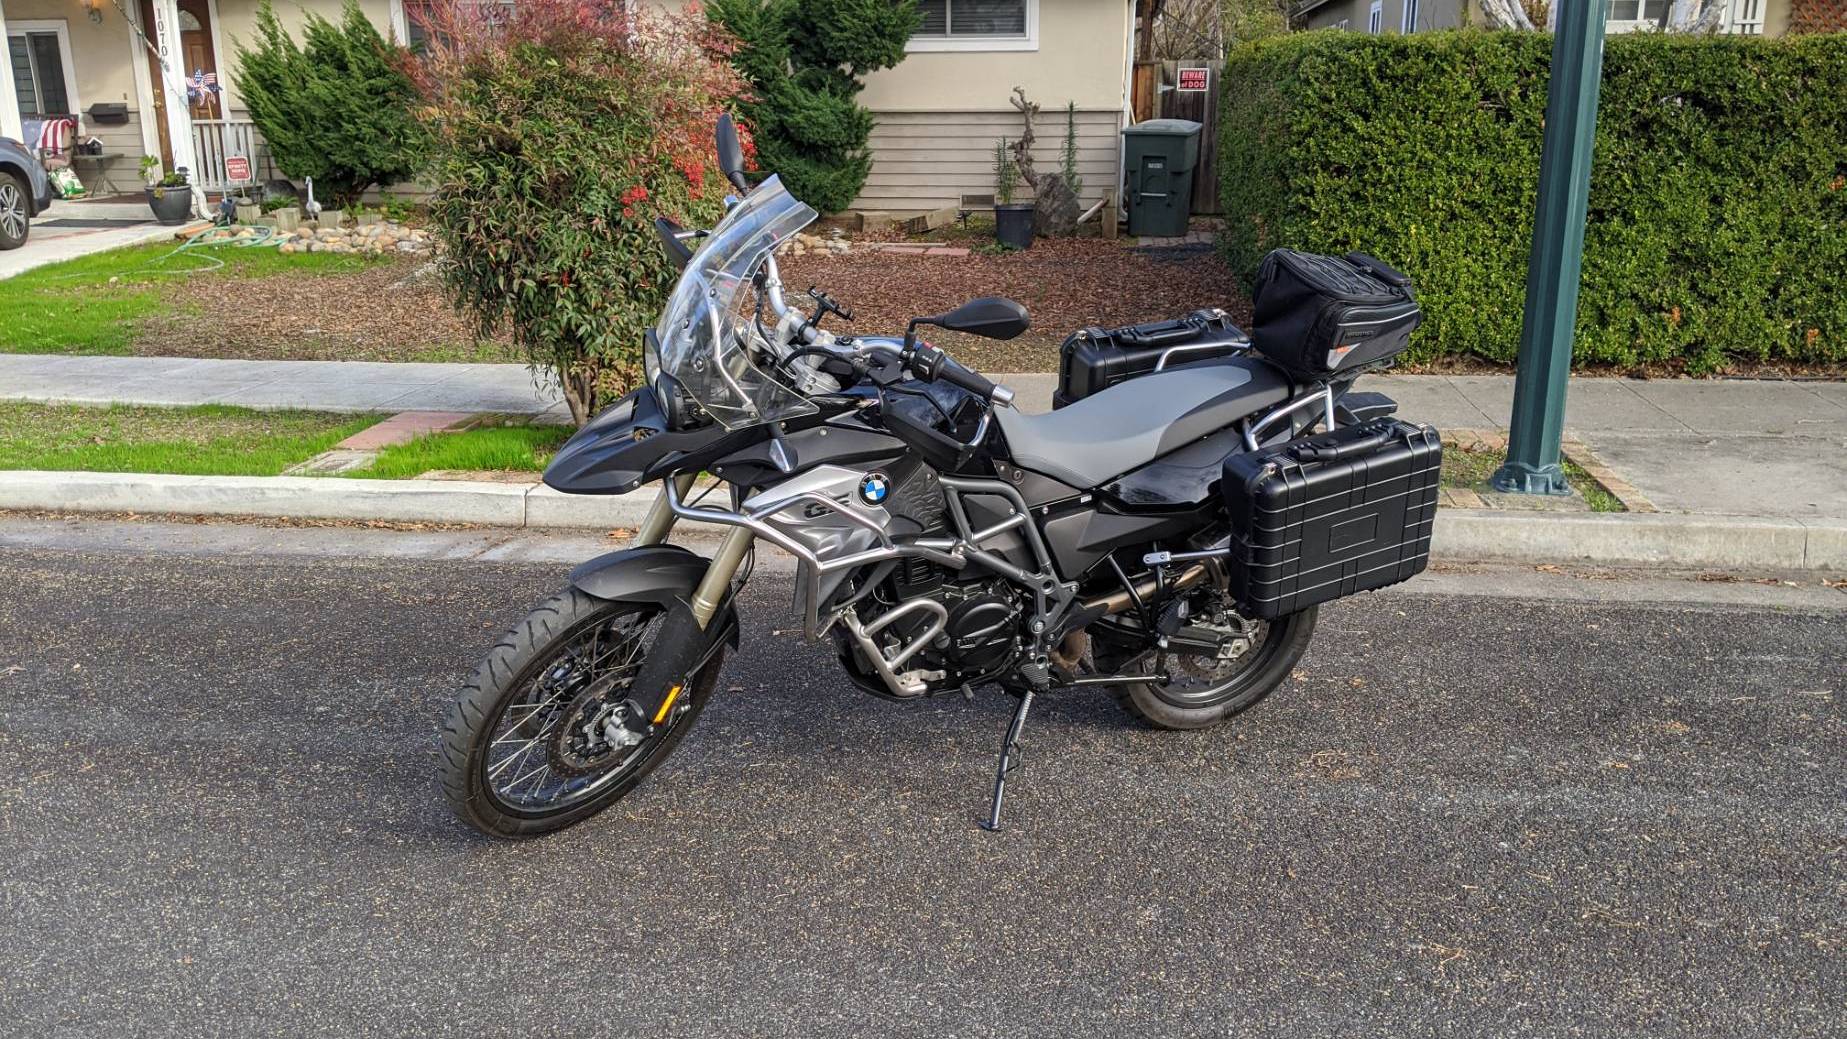 BMW F800GS for rent near Sunnyvale, CA Riders Share